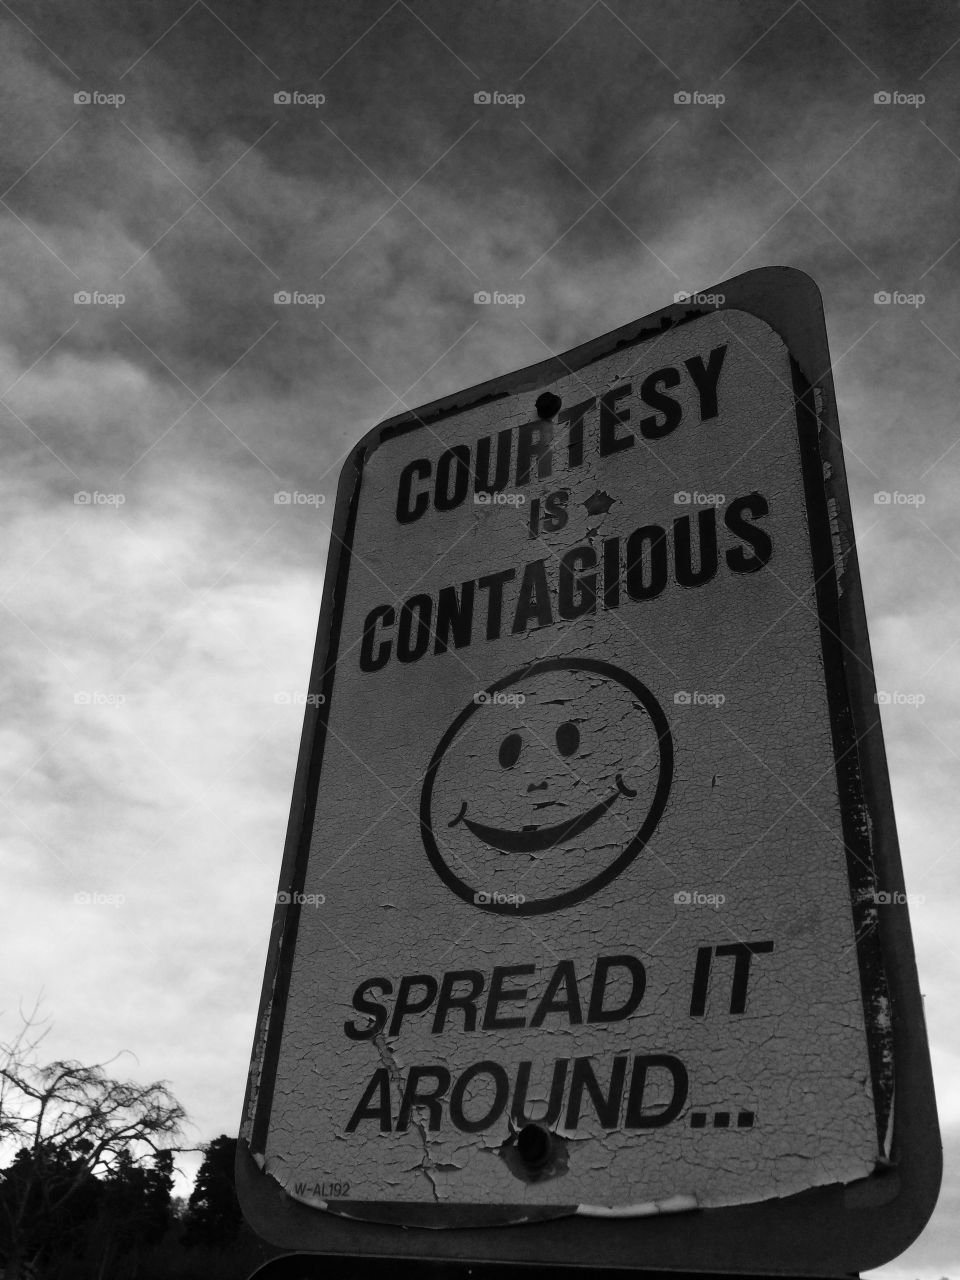 Courtesy is contagious